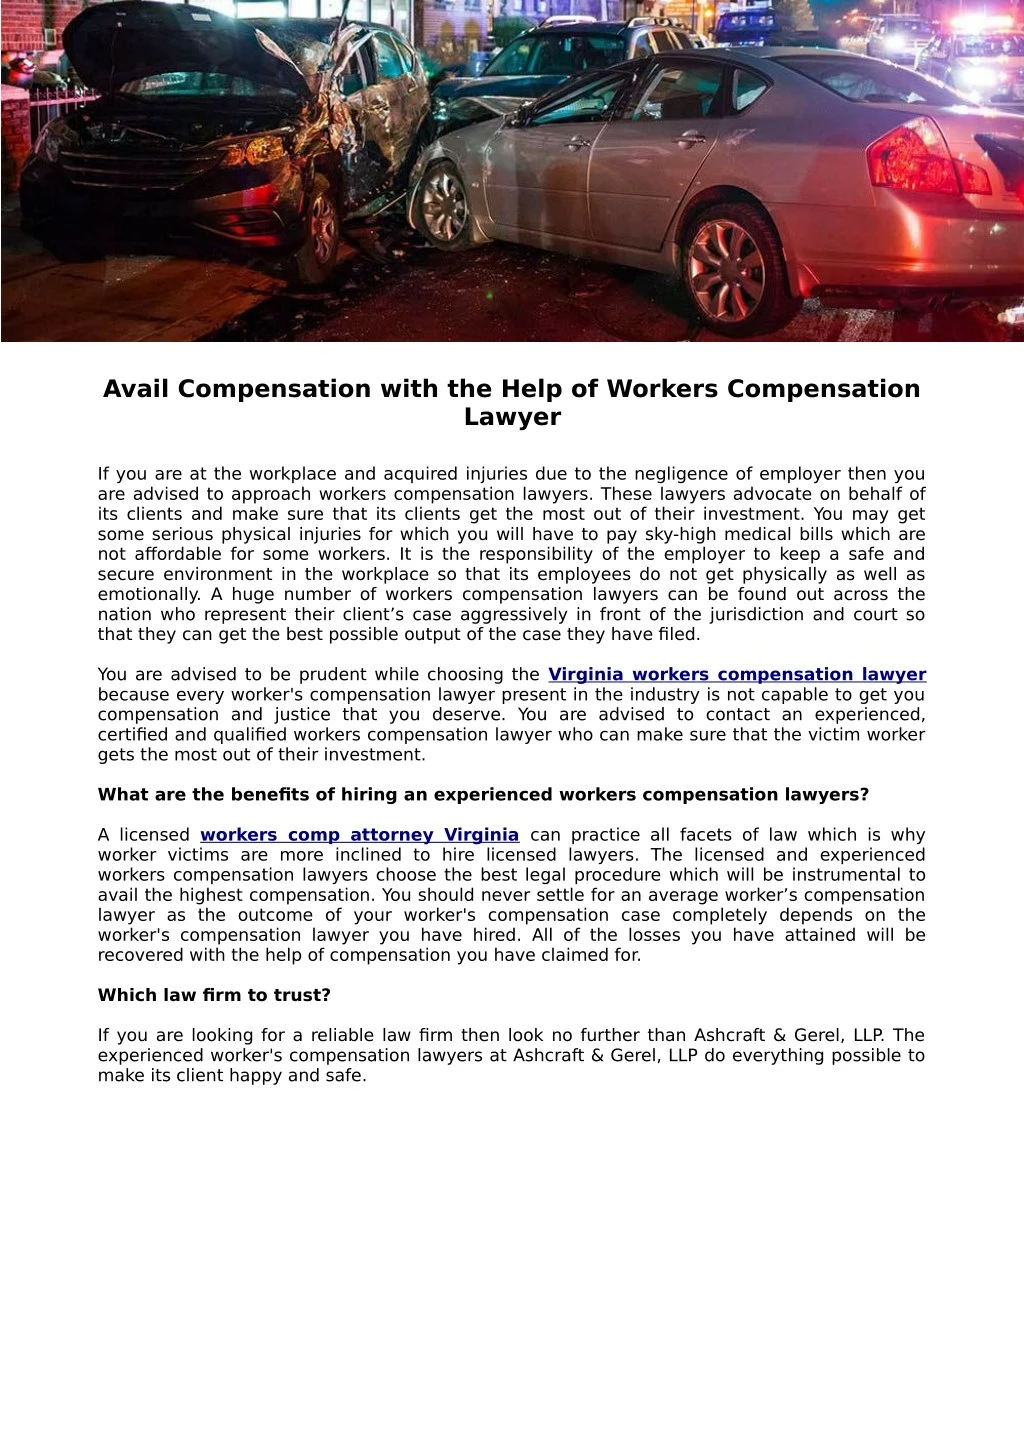 avail compensation with the help of workers